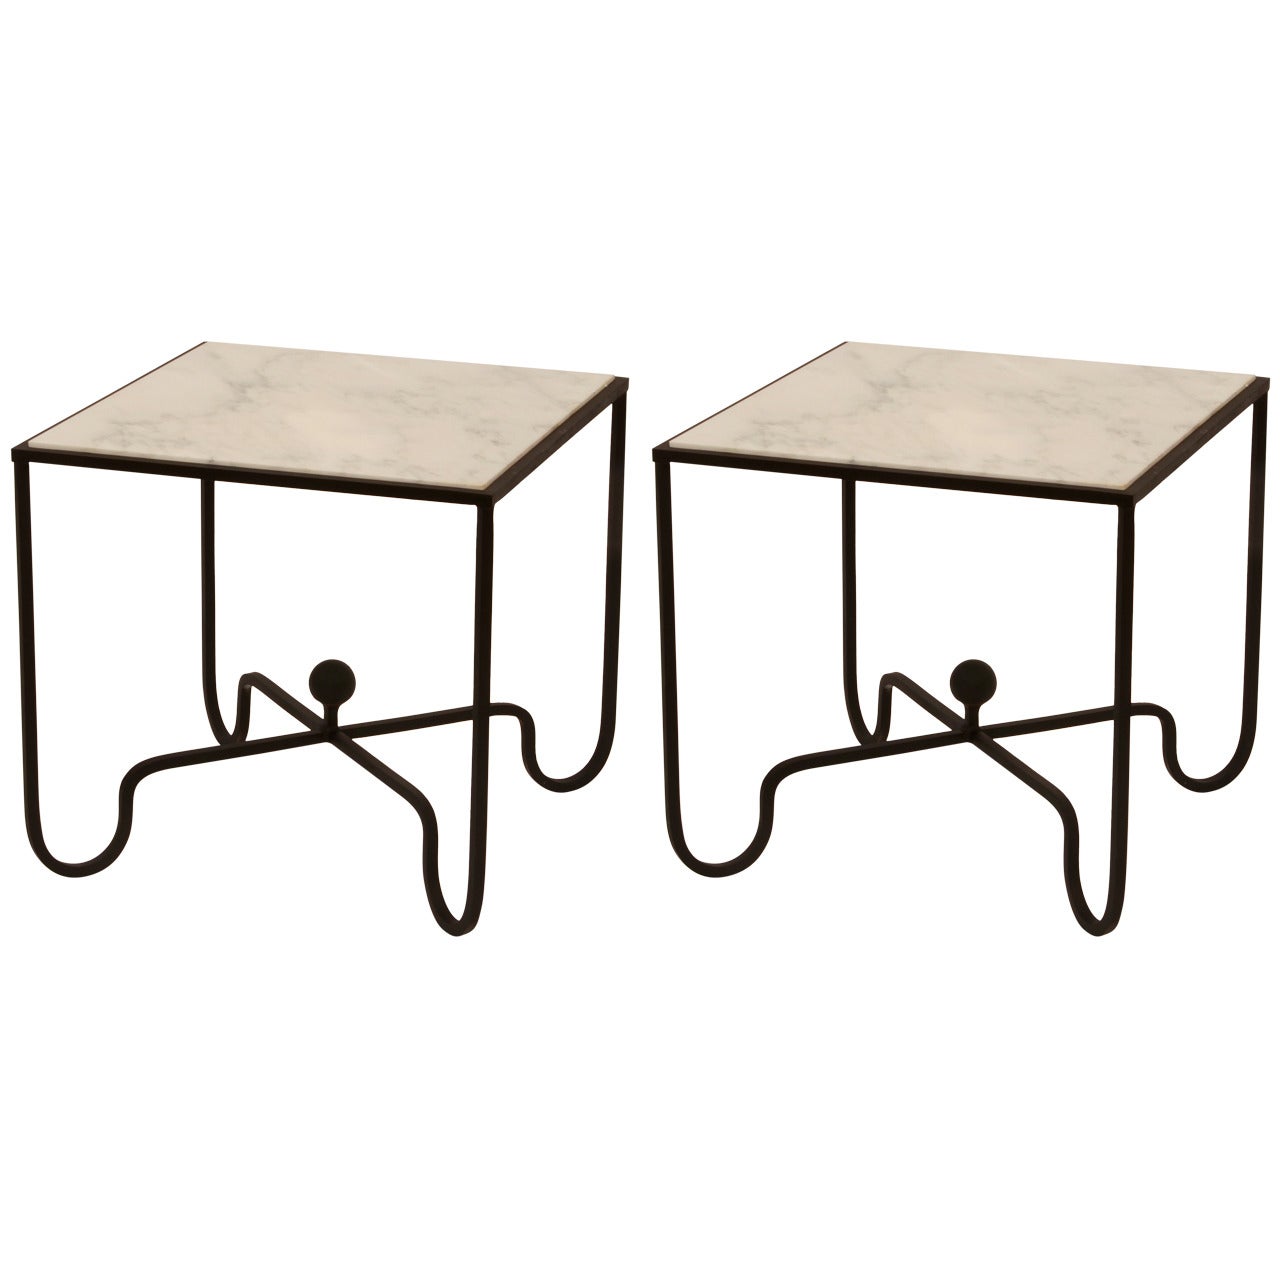 Pair of White Marble and Wrought Iron Side Tables after Mathieu Matégot